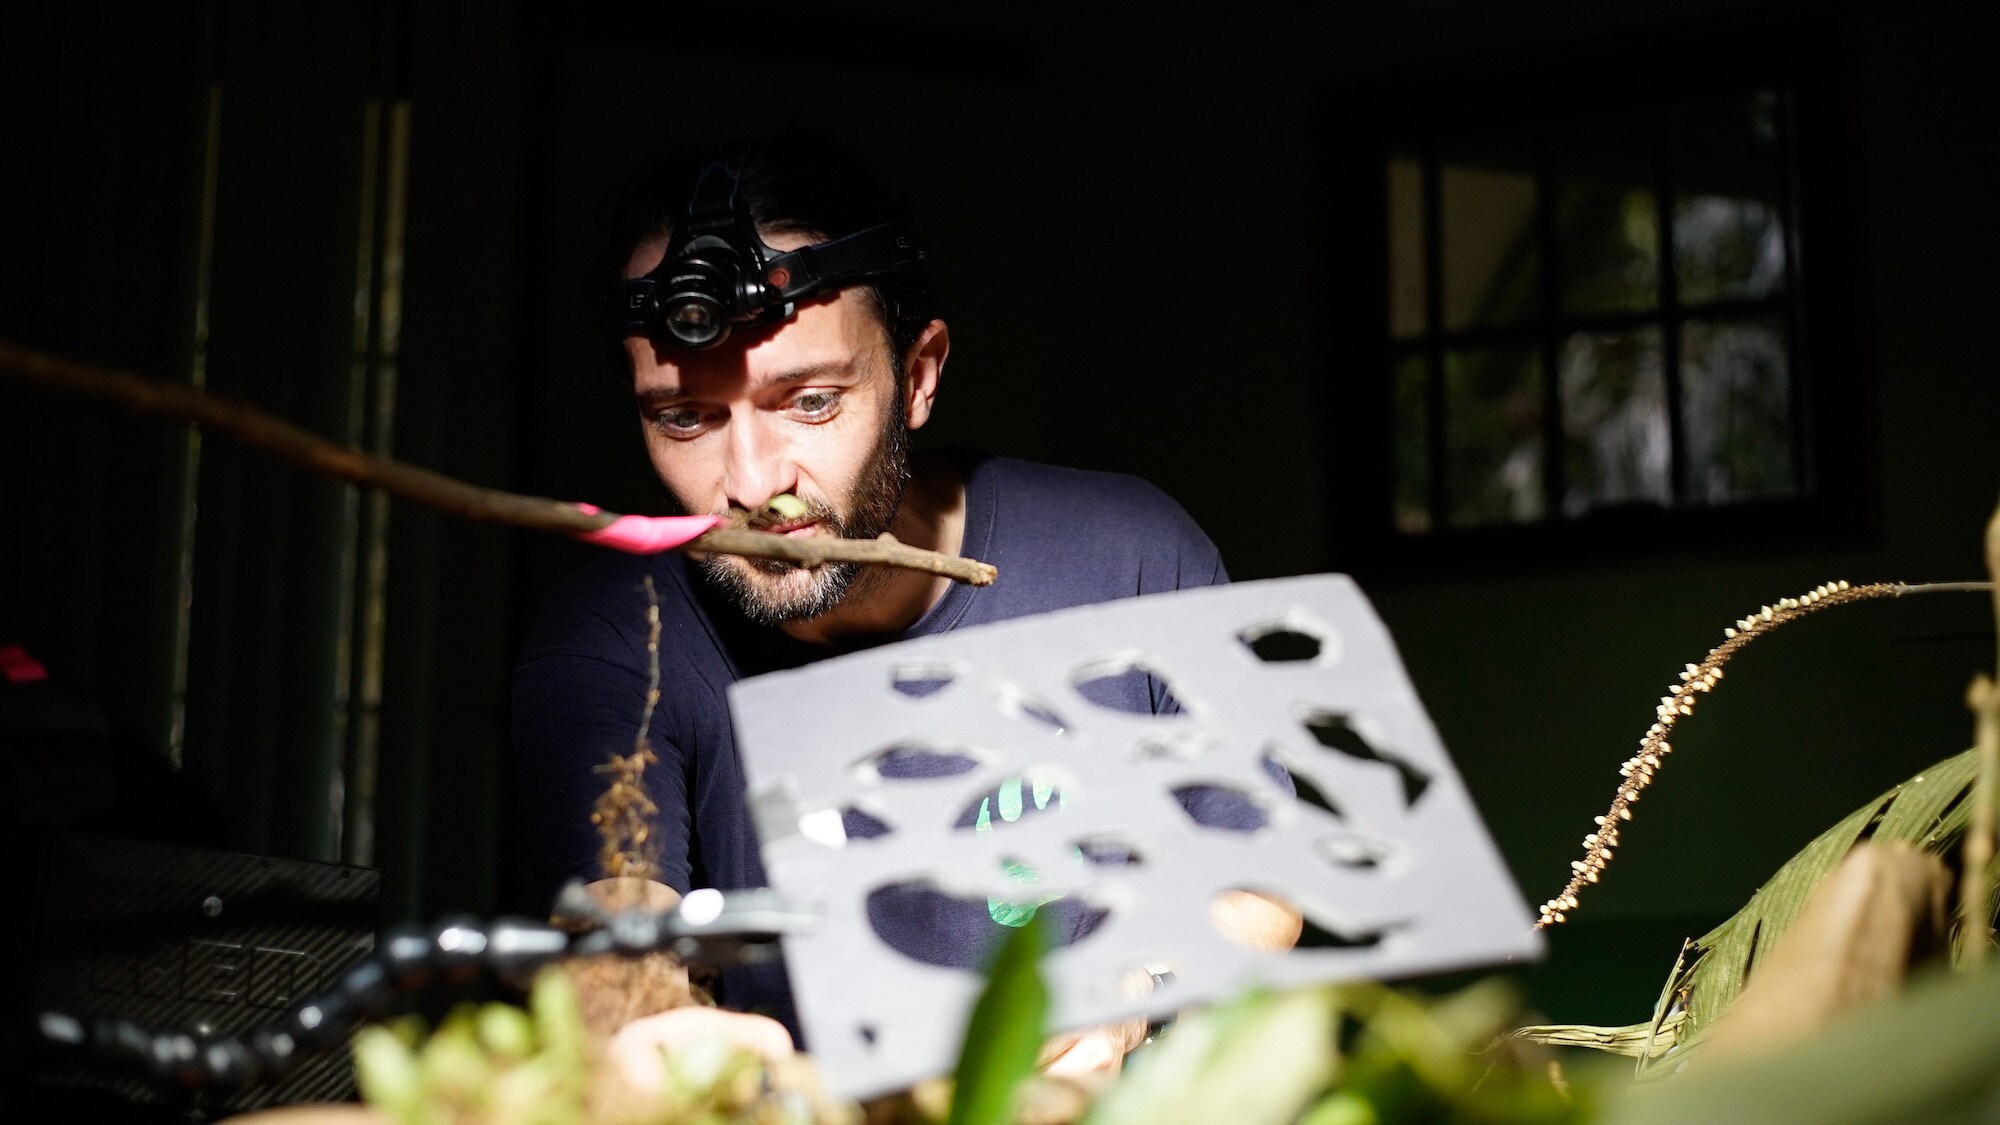 Bug wrangler Tim Cockerill works in the studio during a shoot in Costa Rica for the "Welcome to the Jungle" episode of “A Real Bug’s Life.” (National Geographic/Amy Gilchrist)